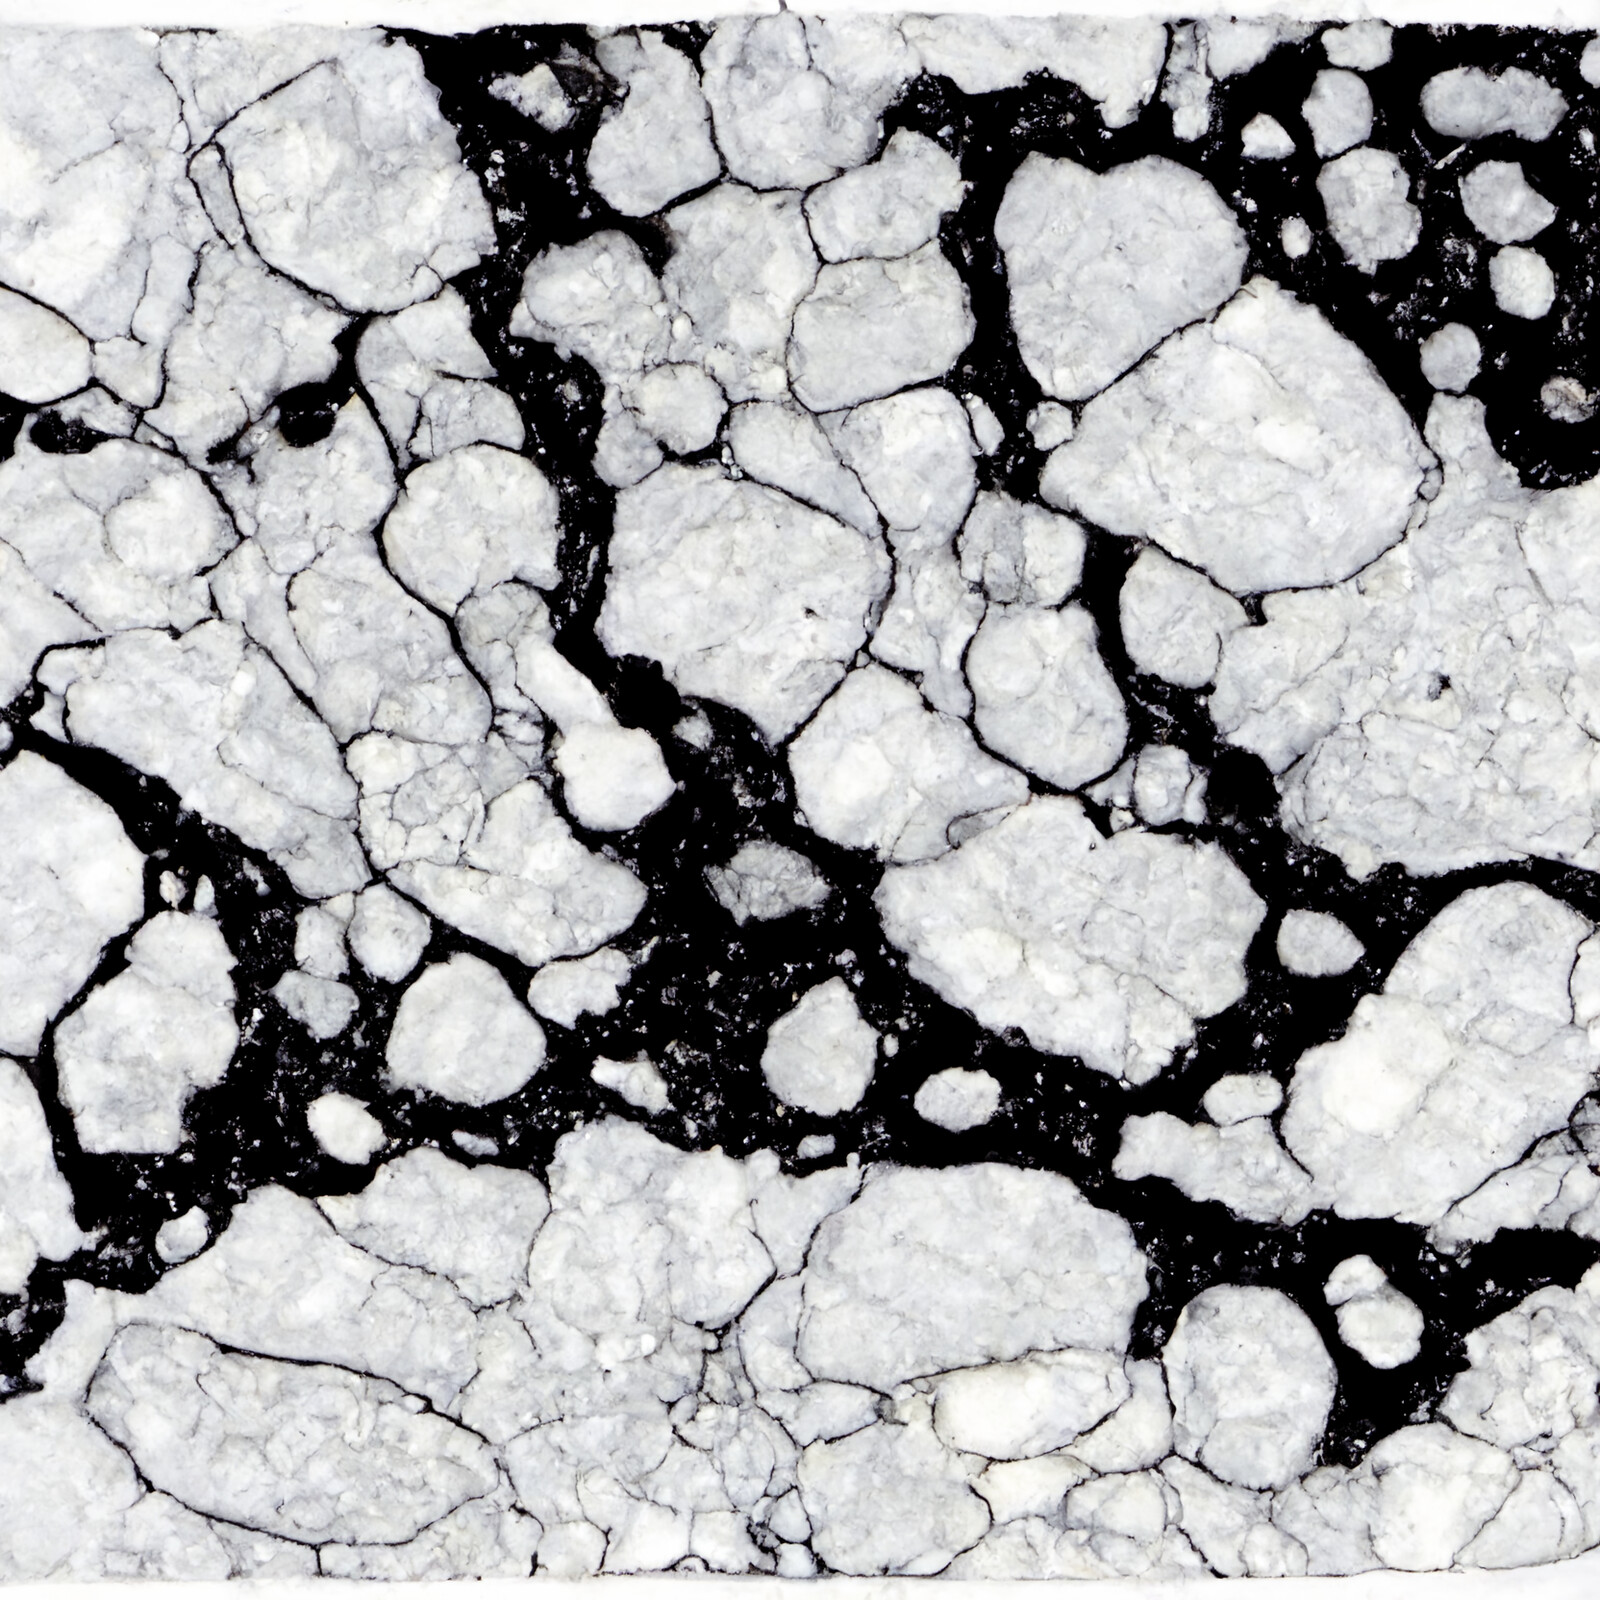 Grunge map creation test - raw outputs. Editing would be required to make tileable. (Image Prompt: "a pic of black and white marble like cracks square on" )